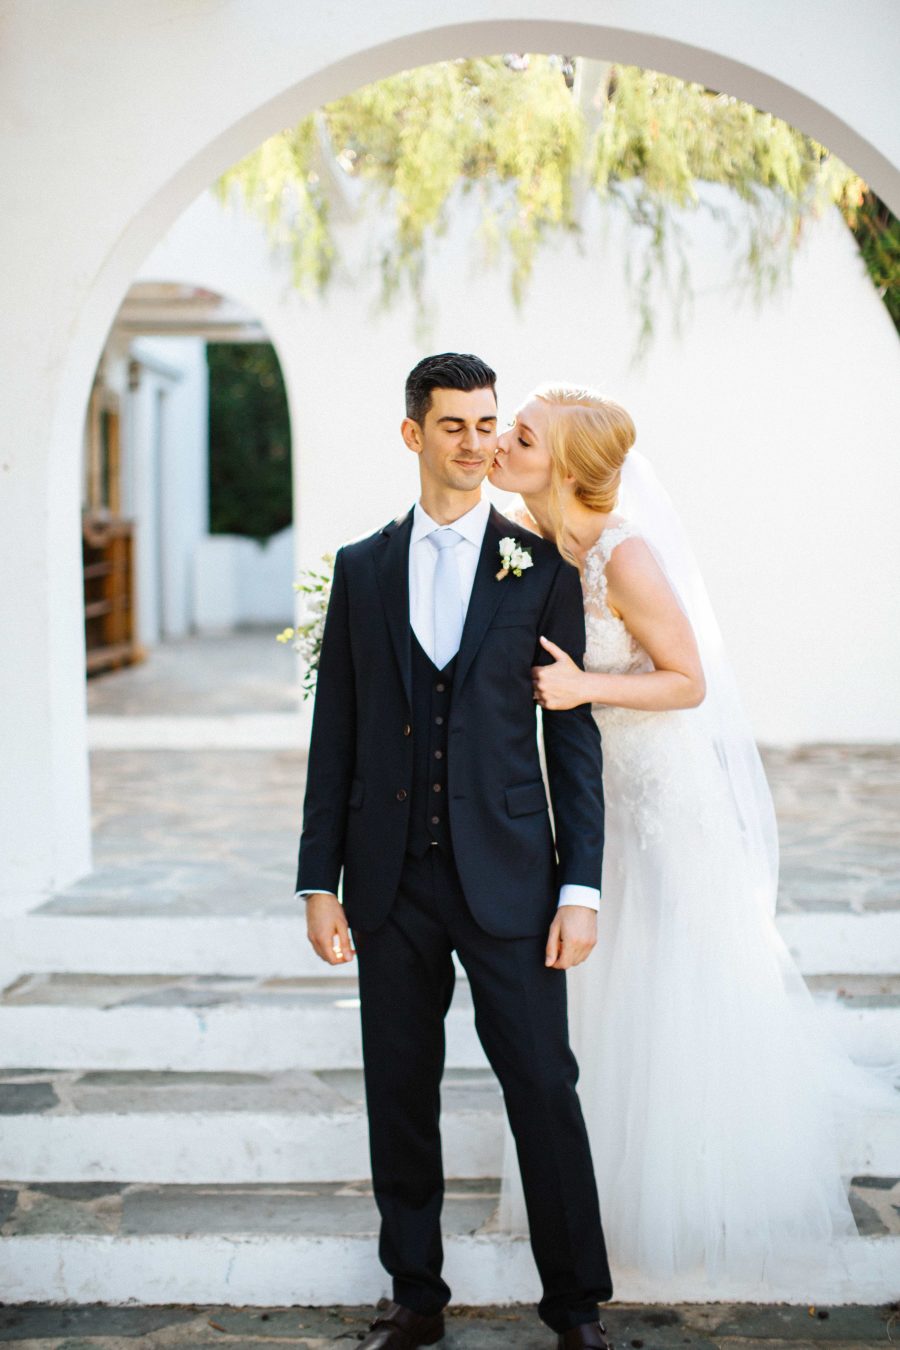 The groom was rocking a black three piece wedding suit with a light blue tie, brown shoes and a neutral boutonniere